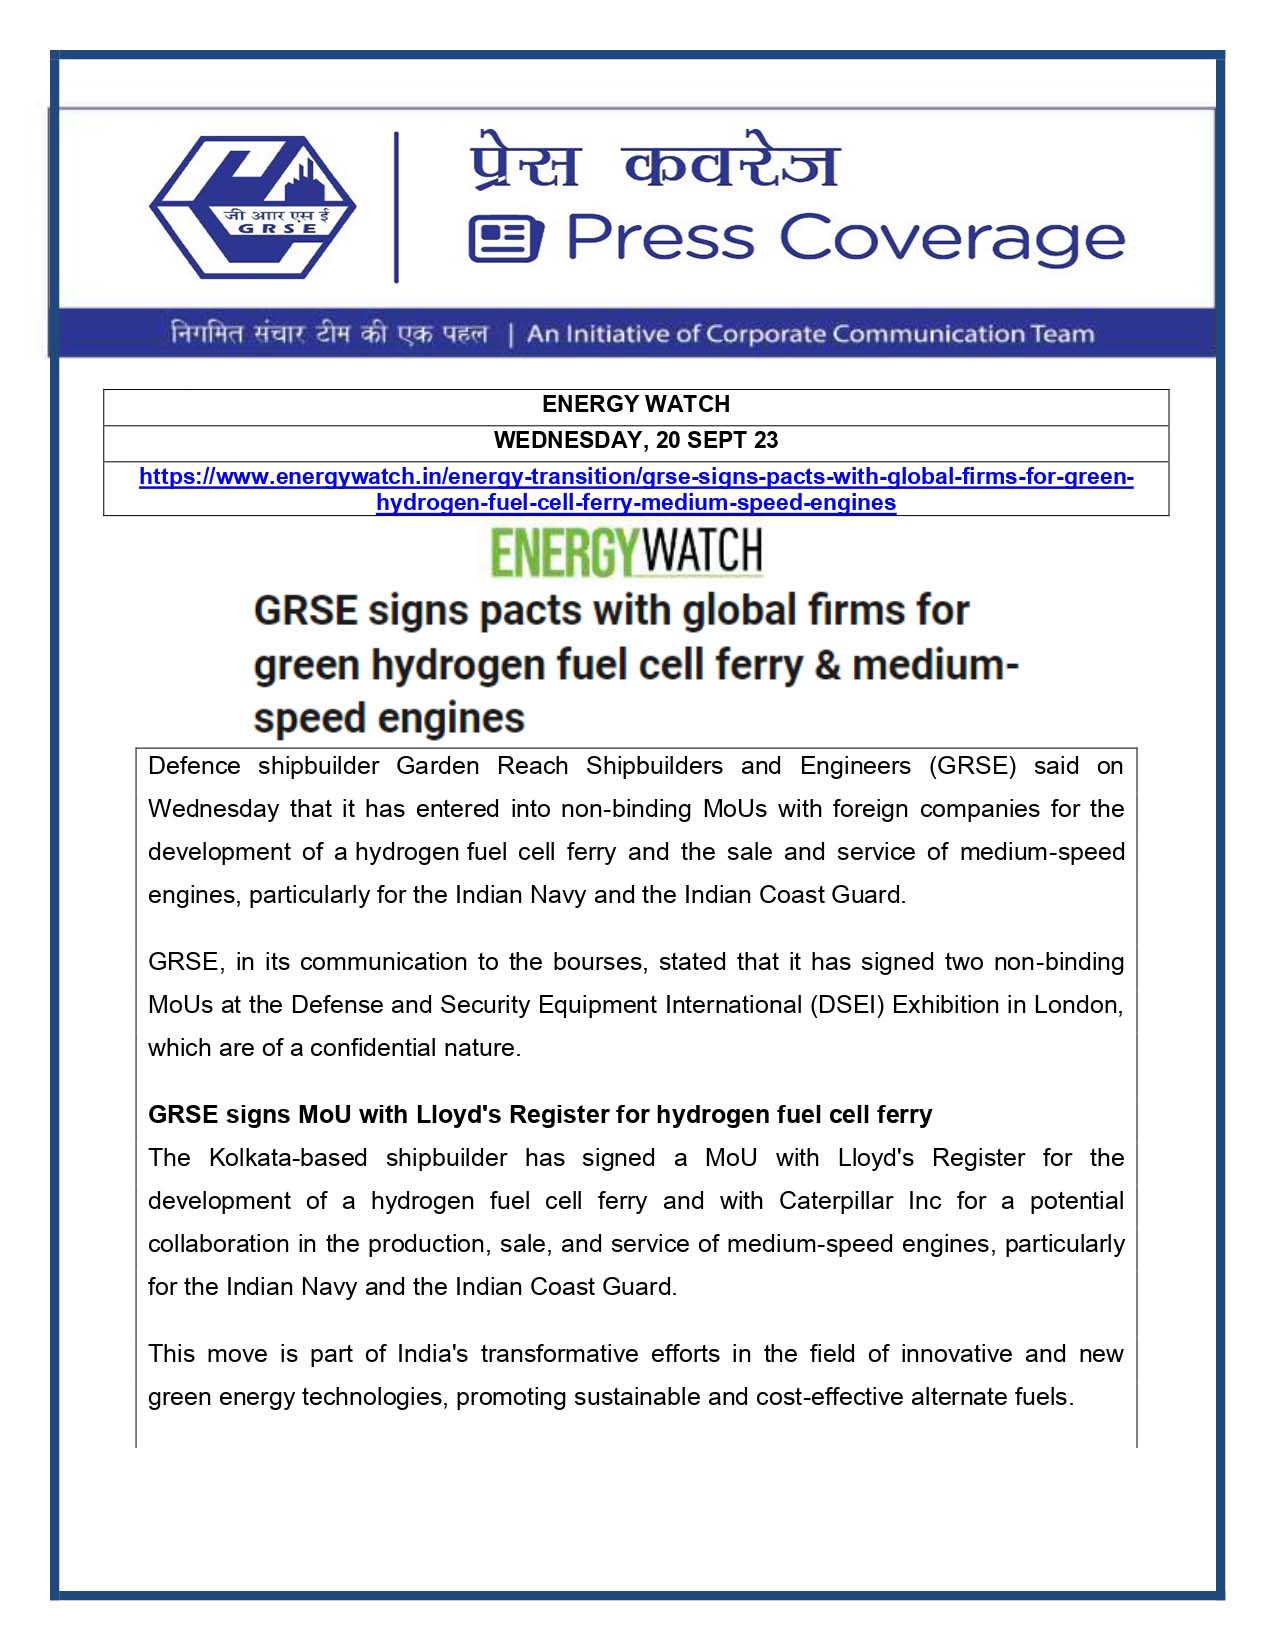 Press Coverage : Energy Watch, 20 Sep 23 : GRSE signs pact with Global firms for Hydrogen Fuel Cell Ferry and Medium-Speed Engines